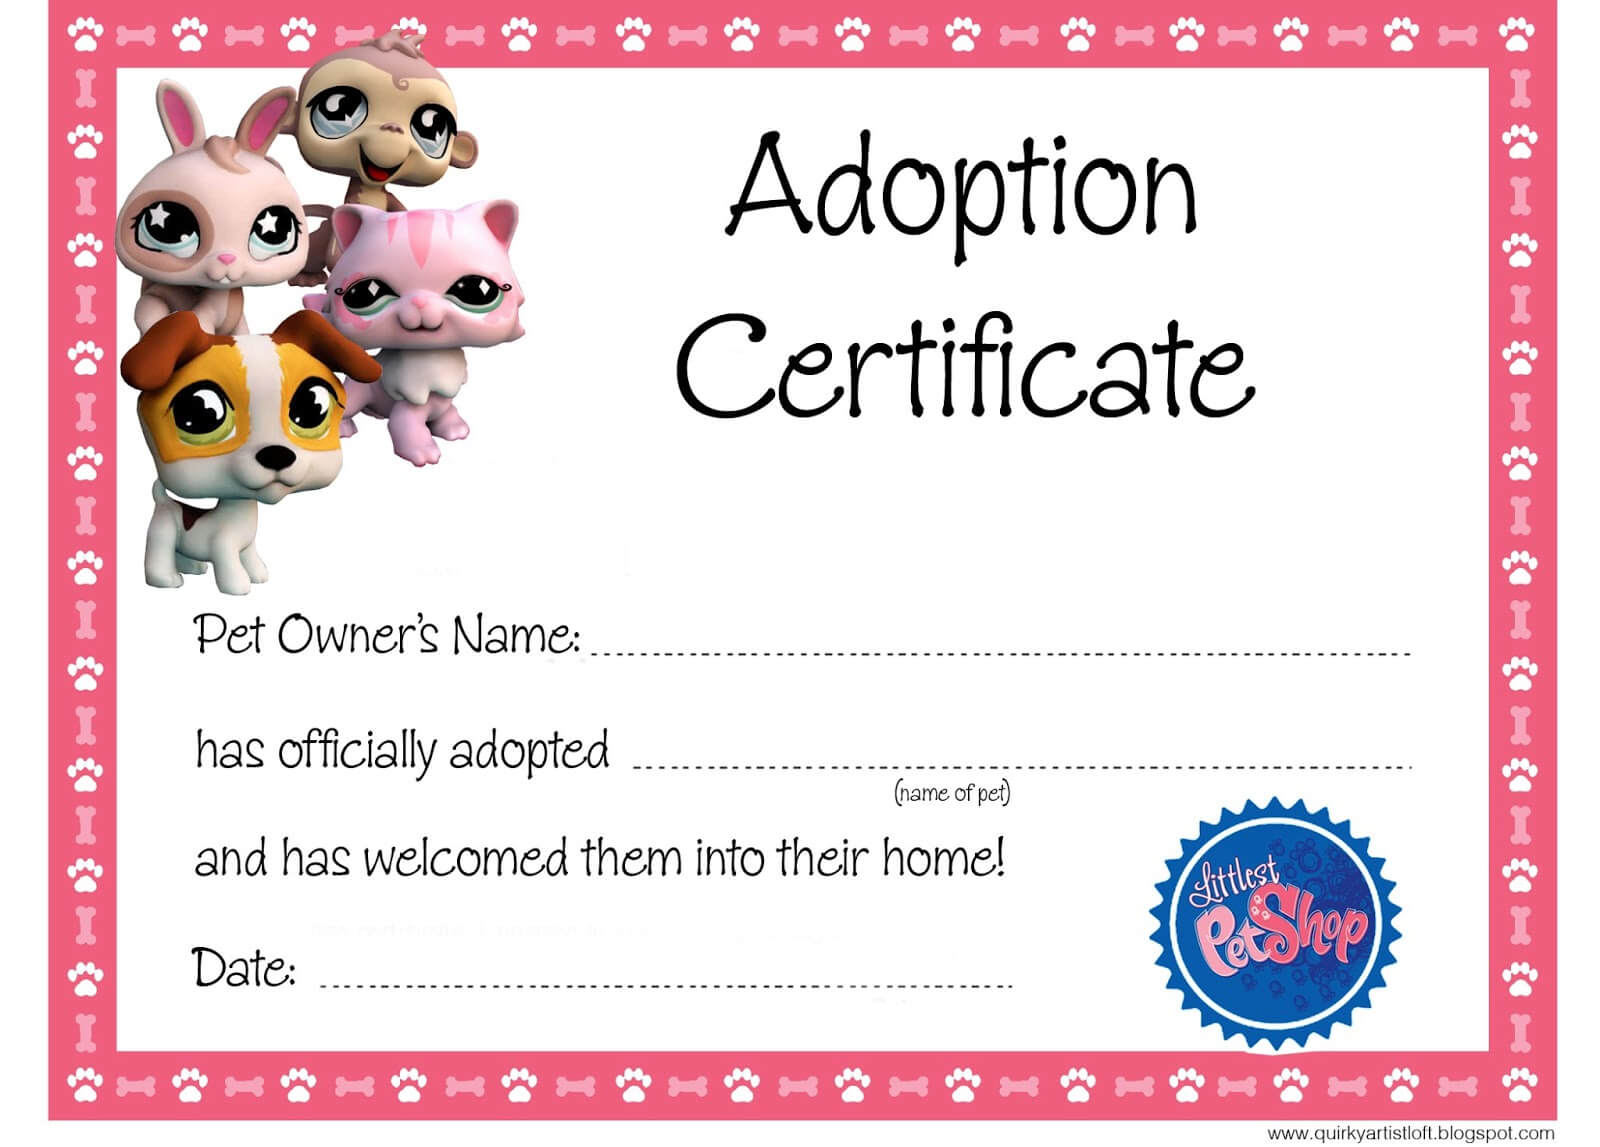 Kitten Adoption Certificate For Toy Adoption Certificate Template